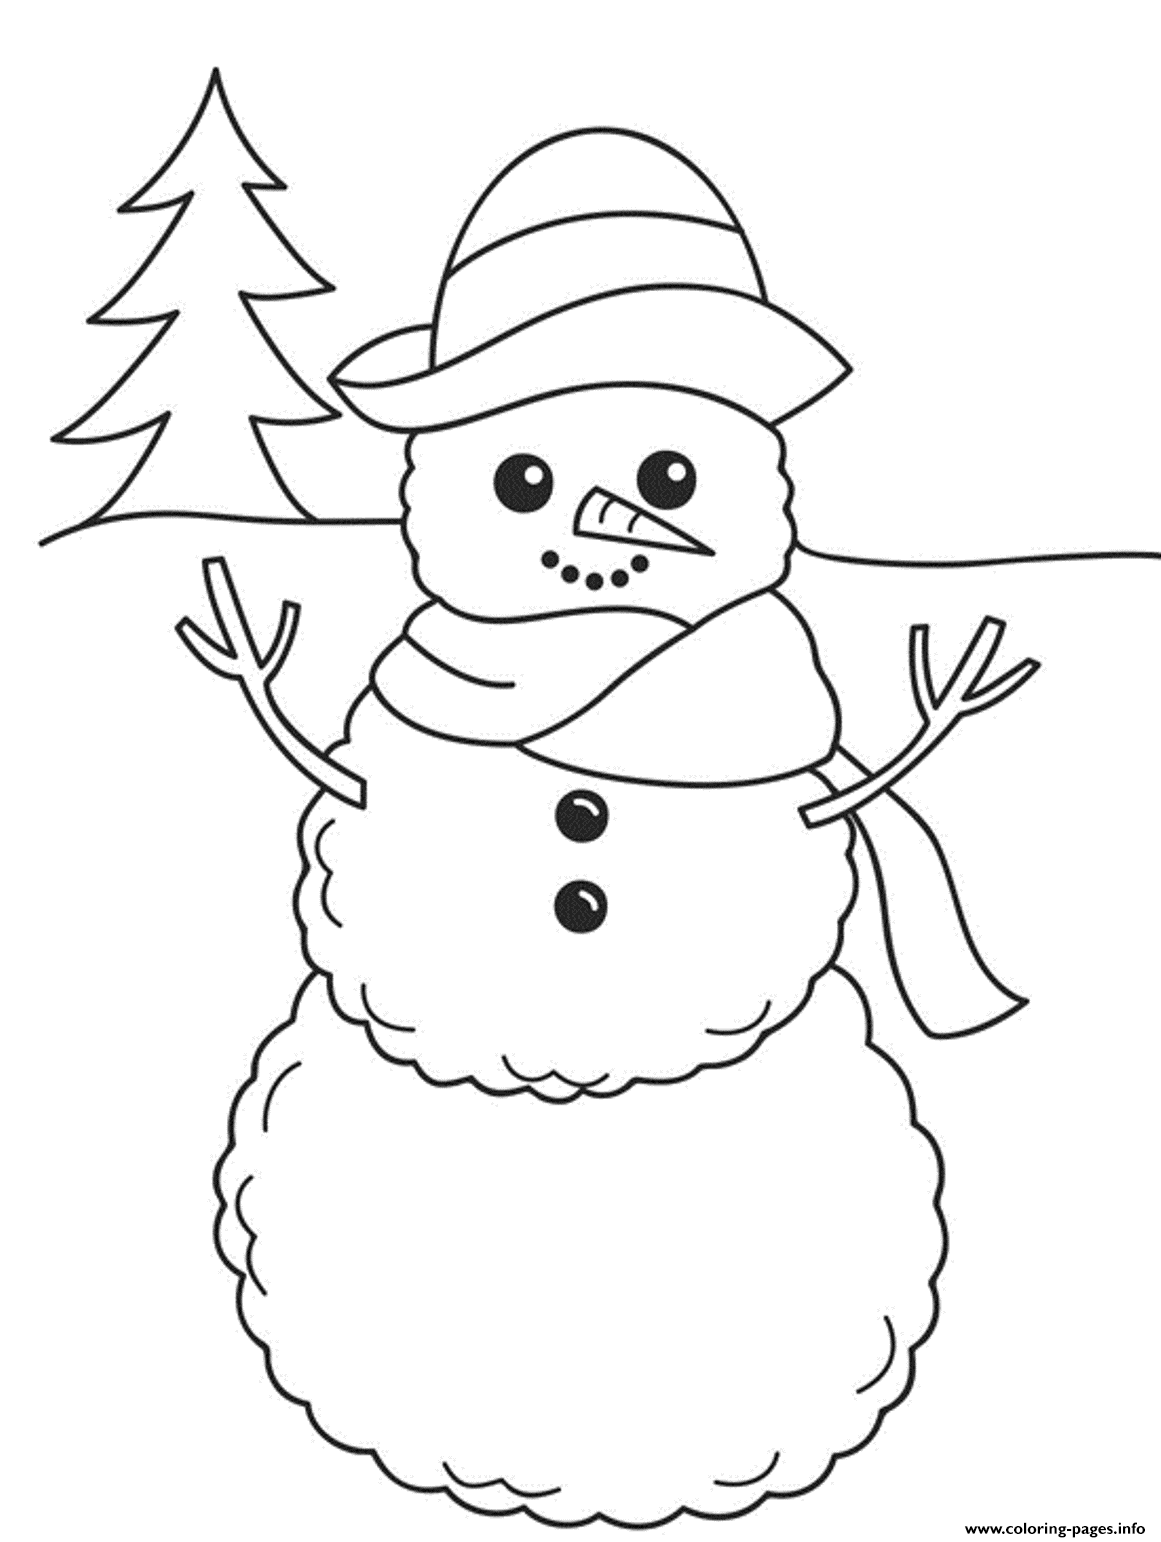 Christmas Winter Smiling Snowman Bbd7 coloring